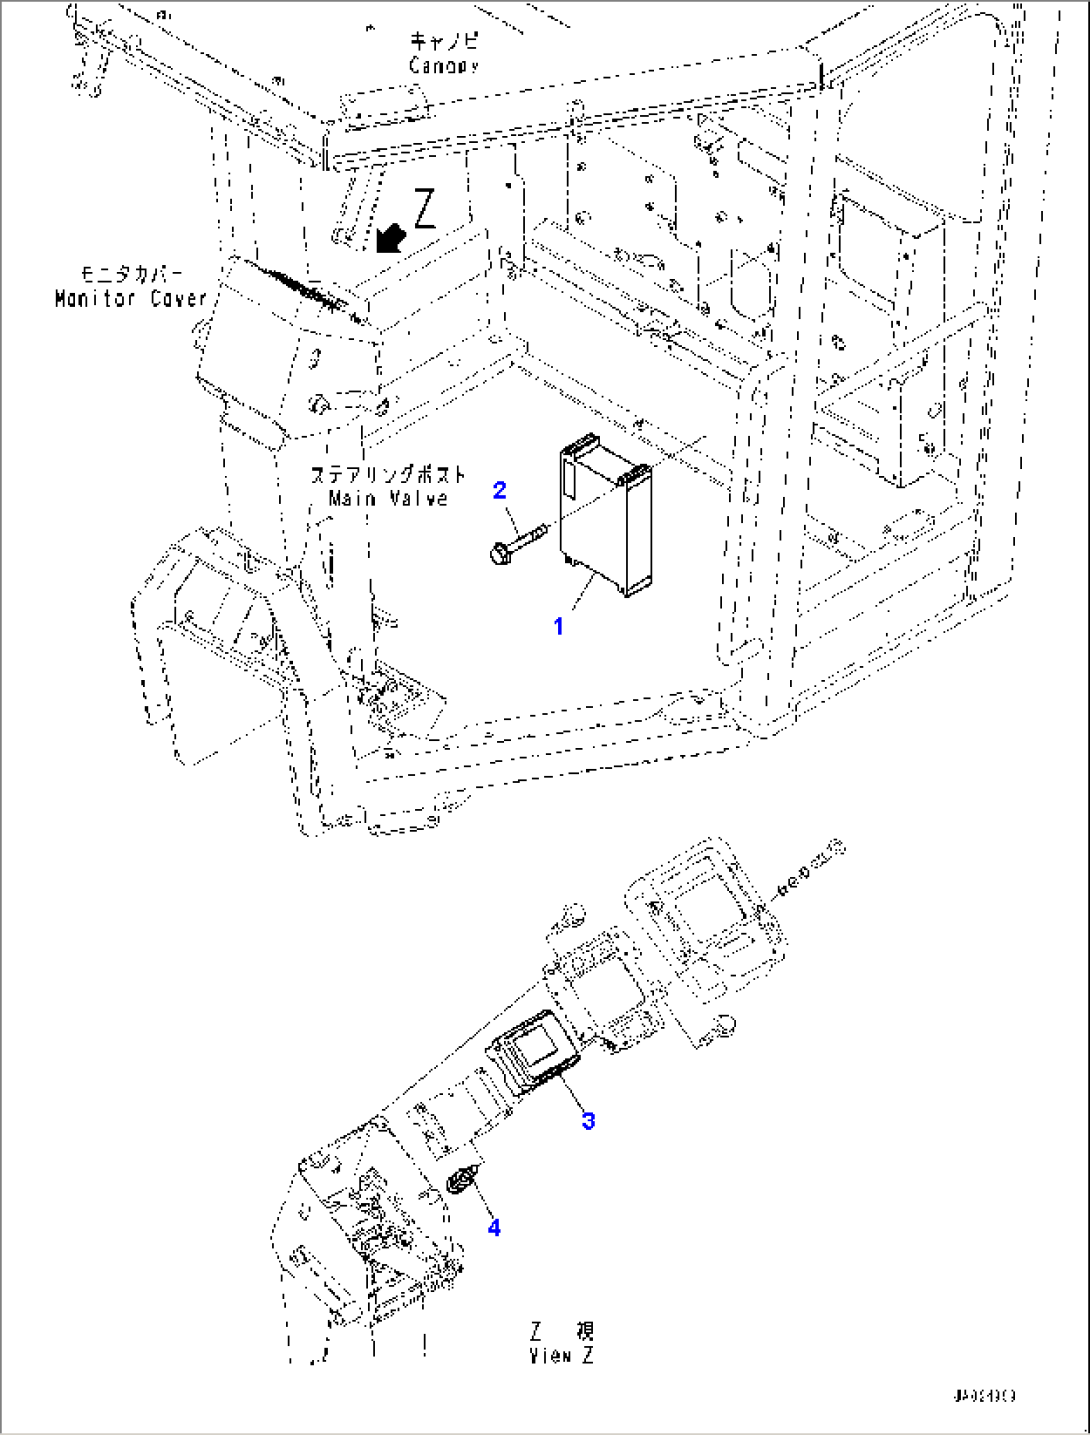 Floor Frame, Controller and Monitor (#1001-)